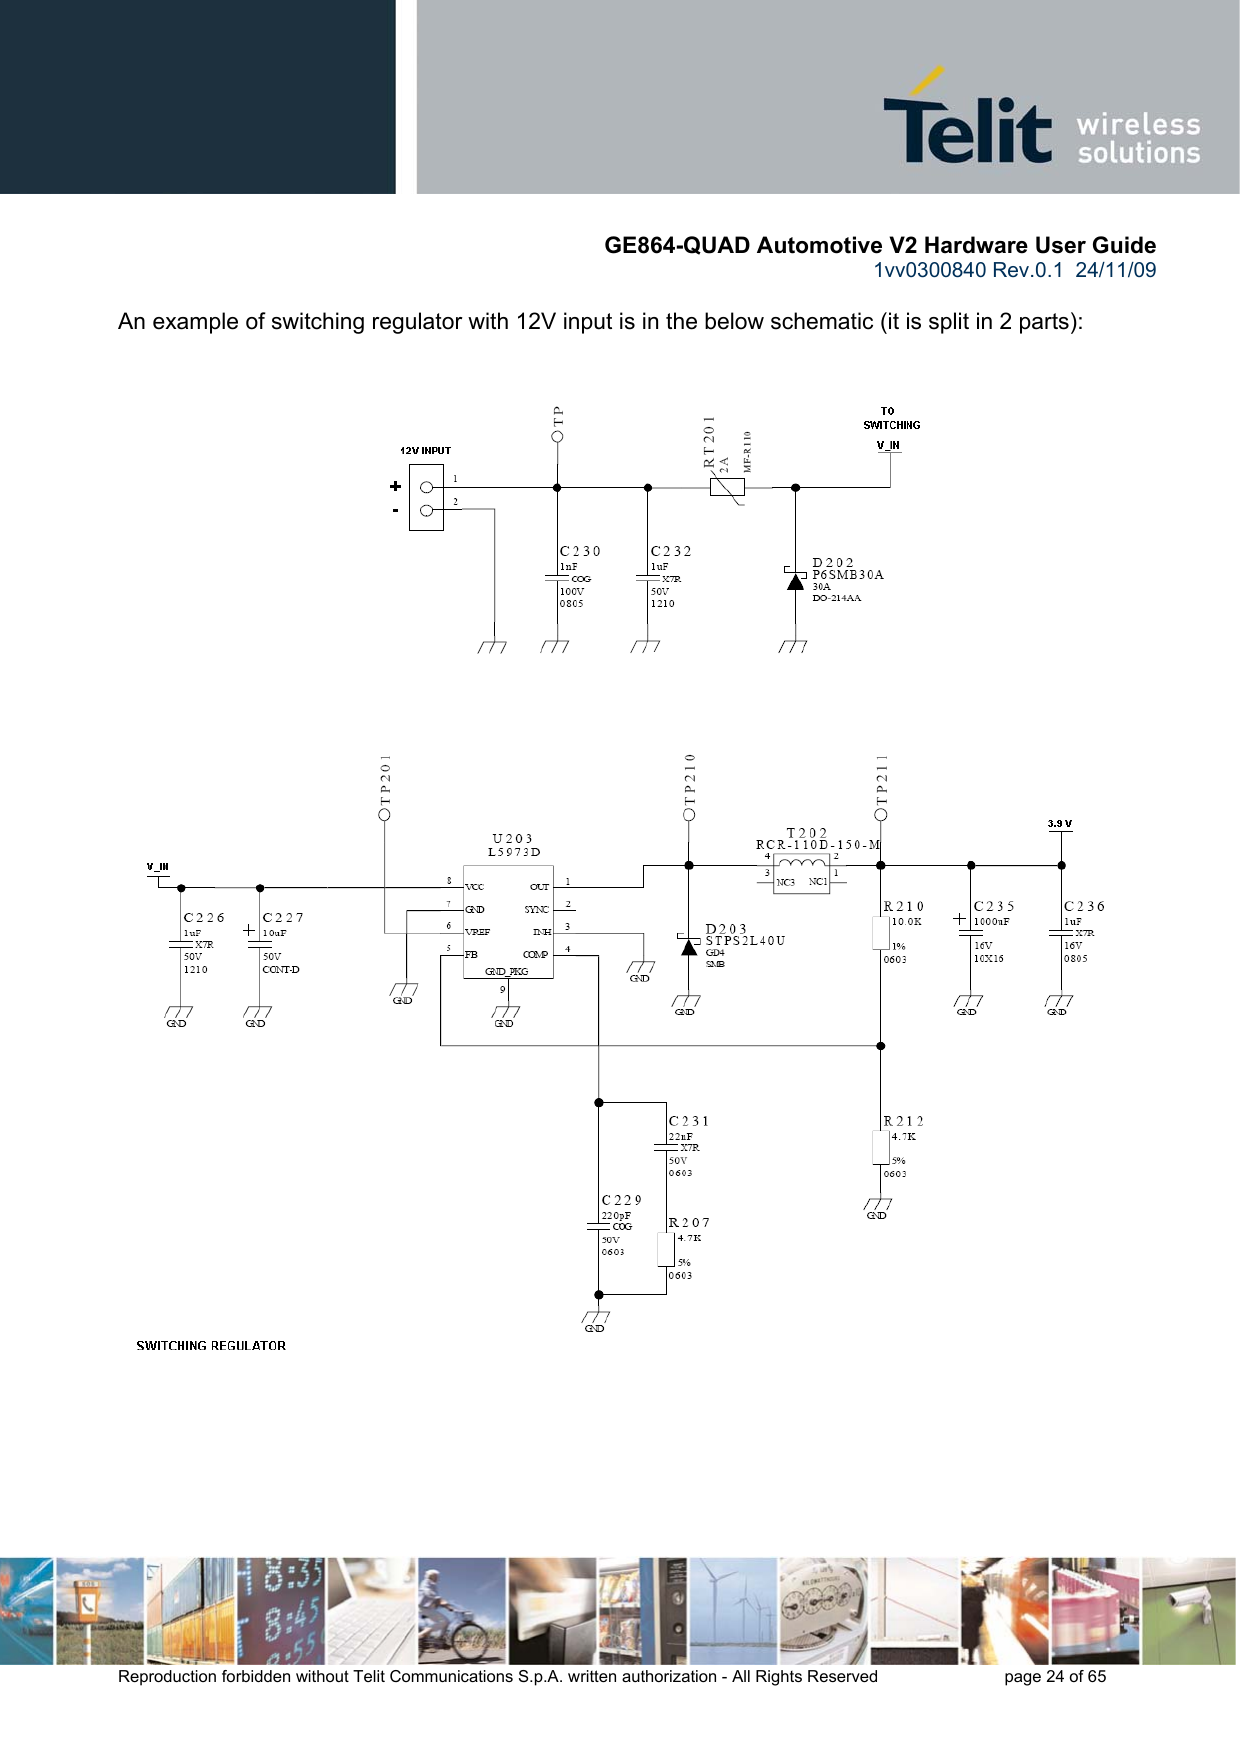       GE864-QUAD Automotive V2 Hardware User Guide 1vv0300840 Rev.0.1  24/11/09      Reproduction forbidden without Telit Communications S.p.A. written authorization - All Rights Reserved    page 24 of 65   An example of switching regulator with 12V input is in the below schematic (it is split in 2 parts):          